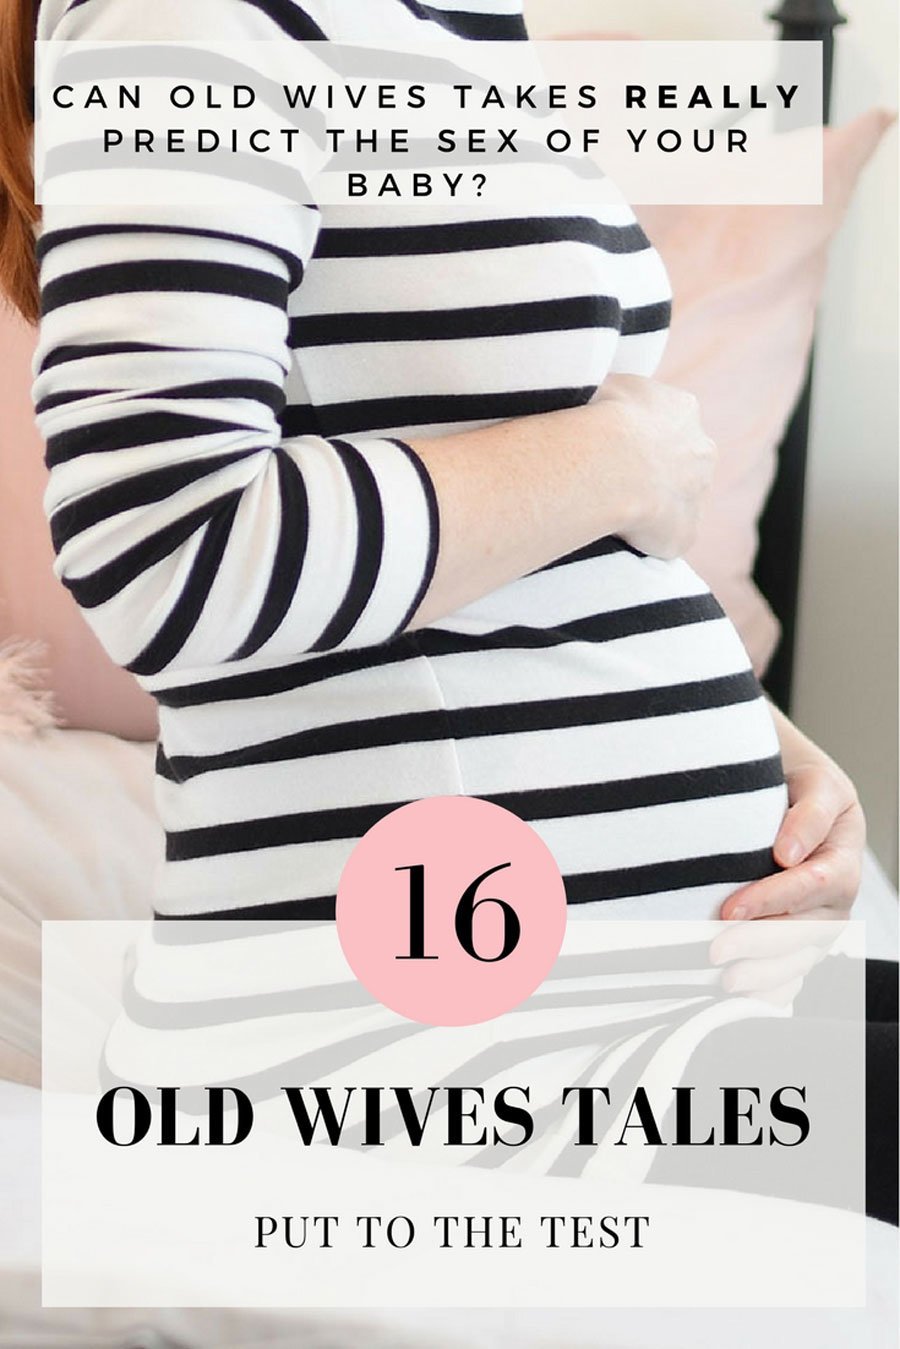 old wives tales about the sex